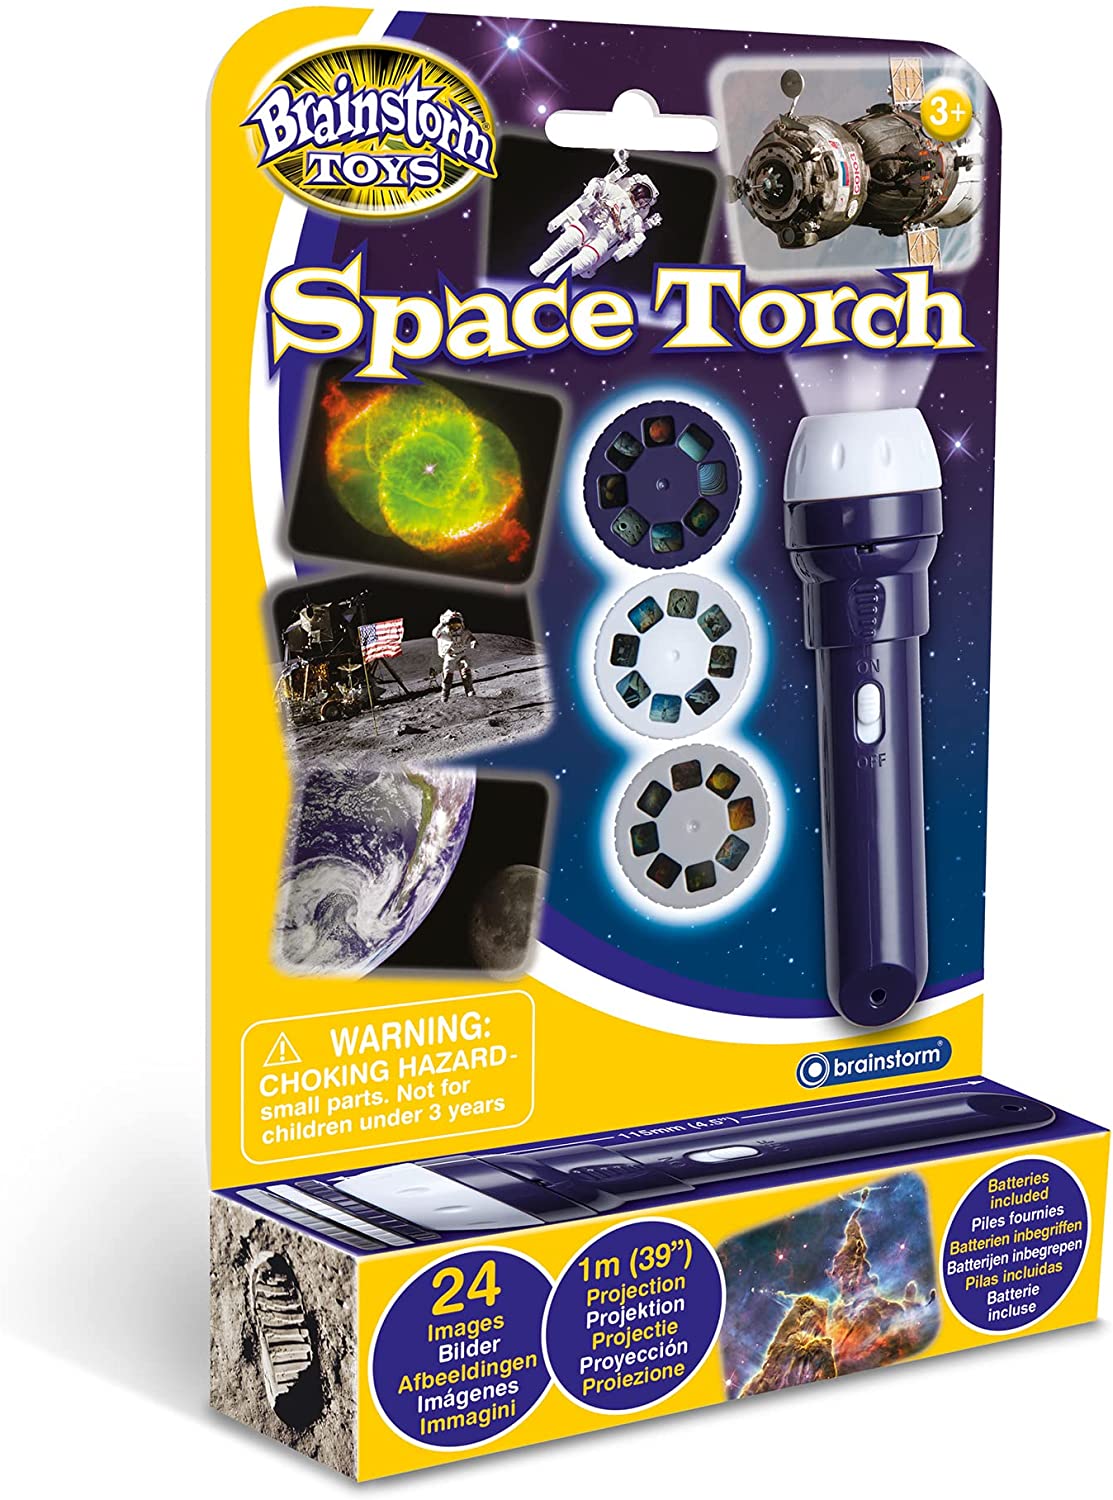 An image of Space Torch and Projector